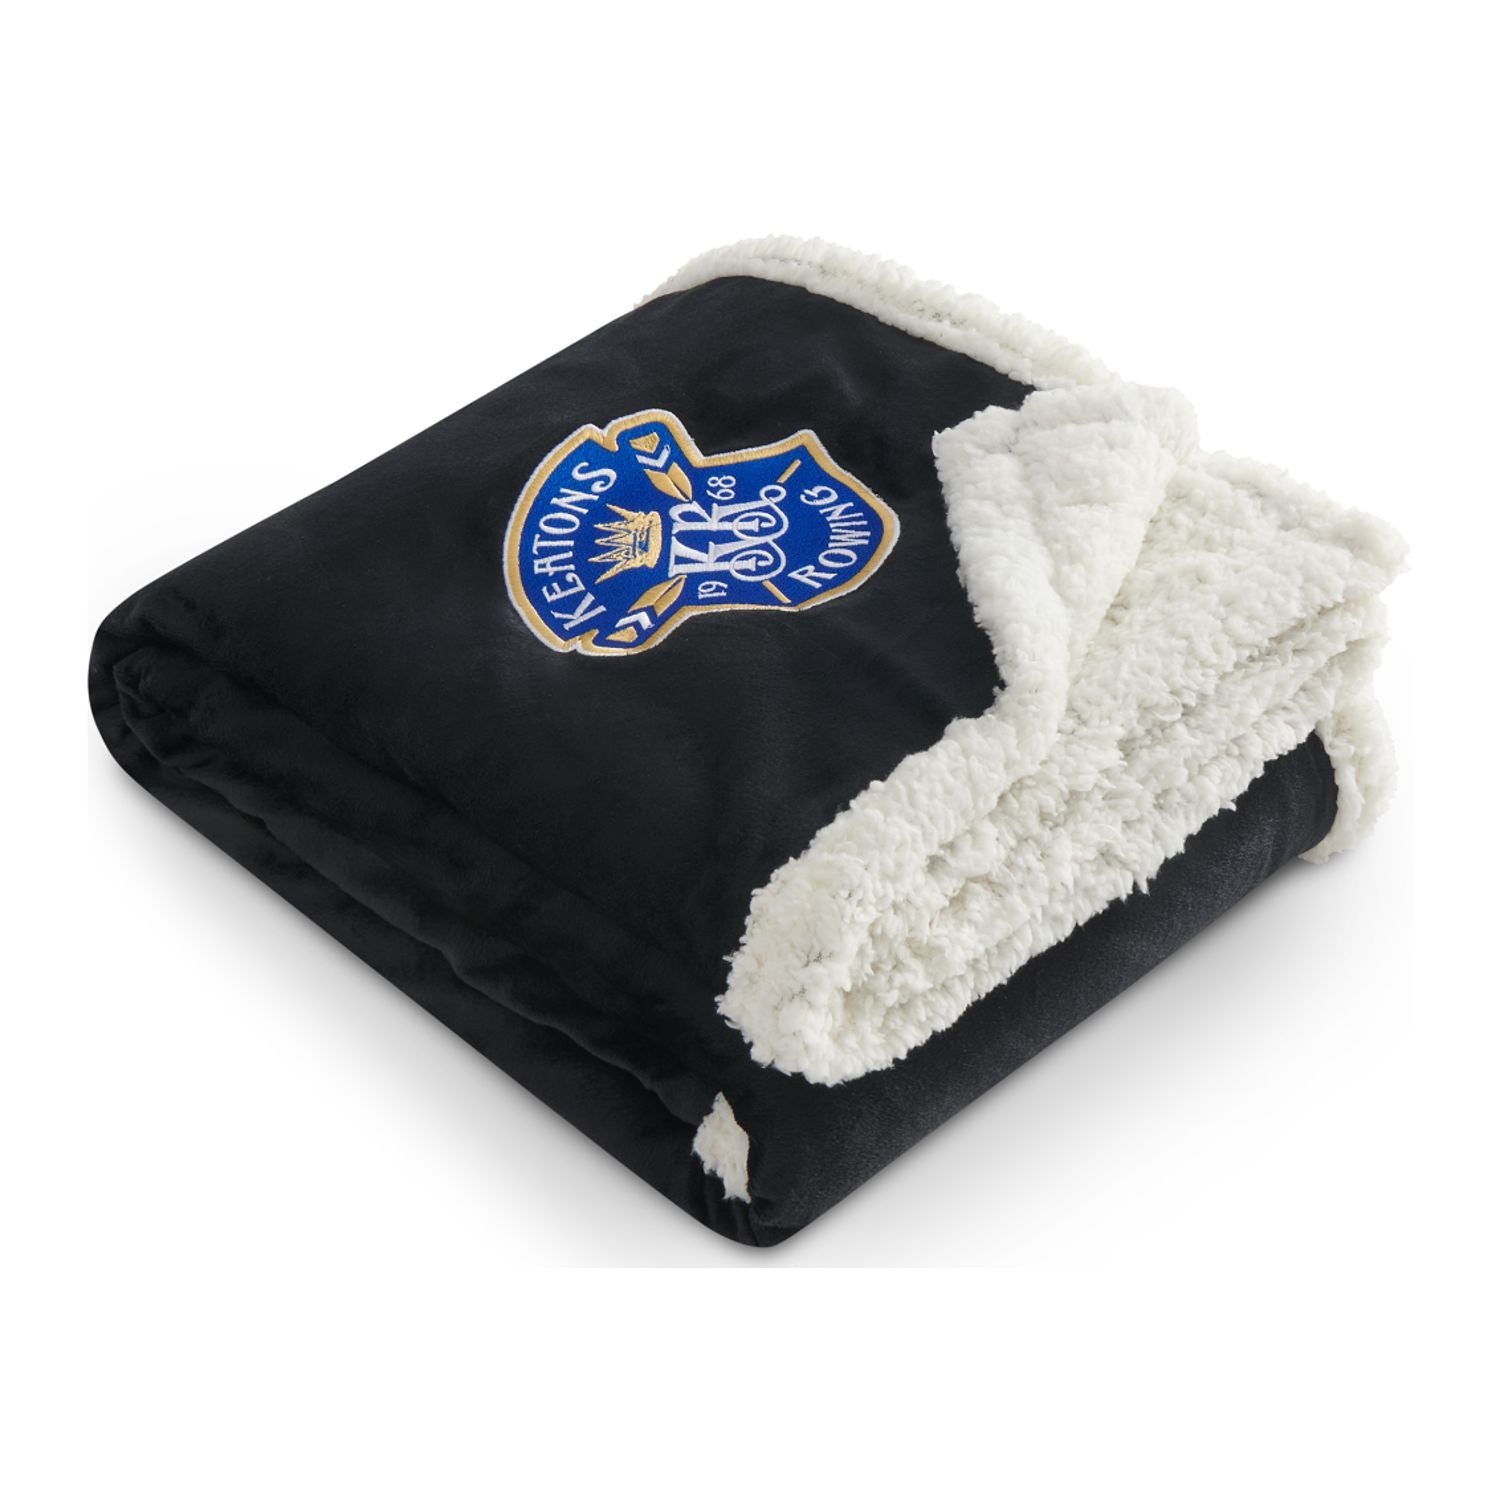 100% Recycled PET Sherpa Blanket